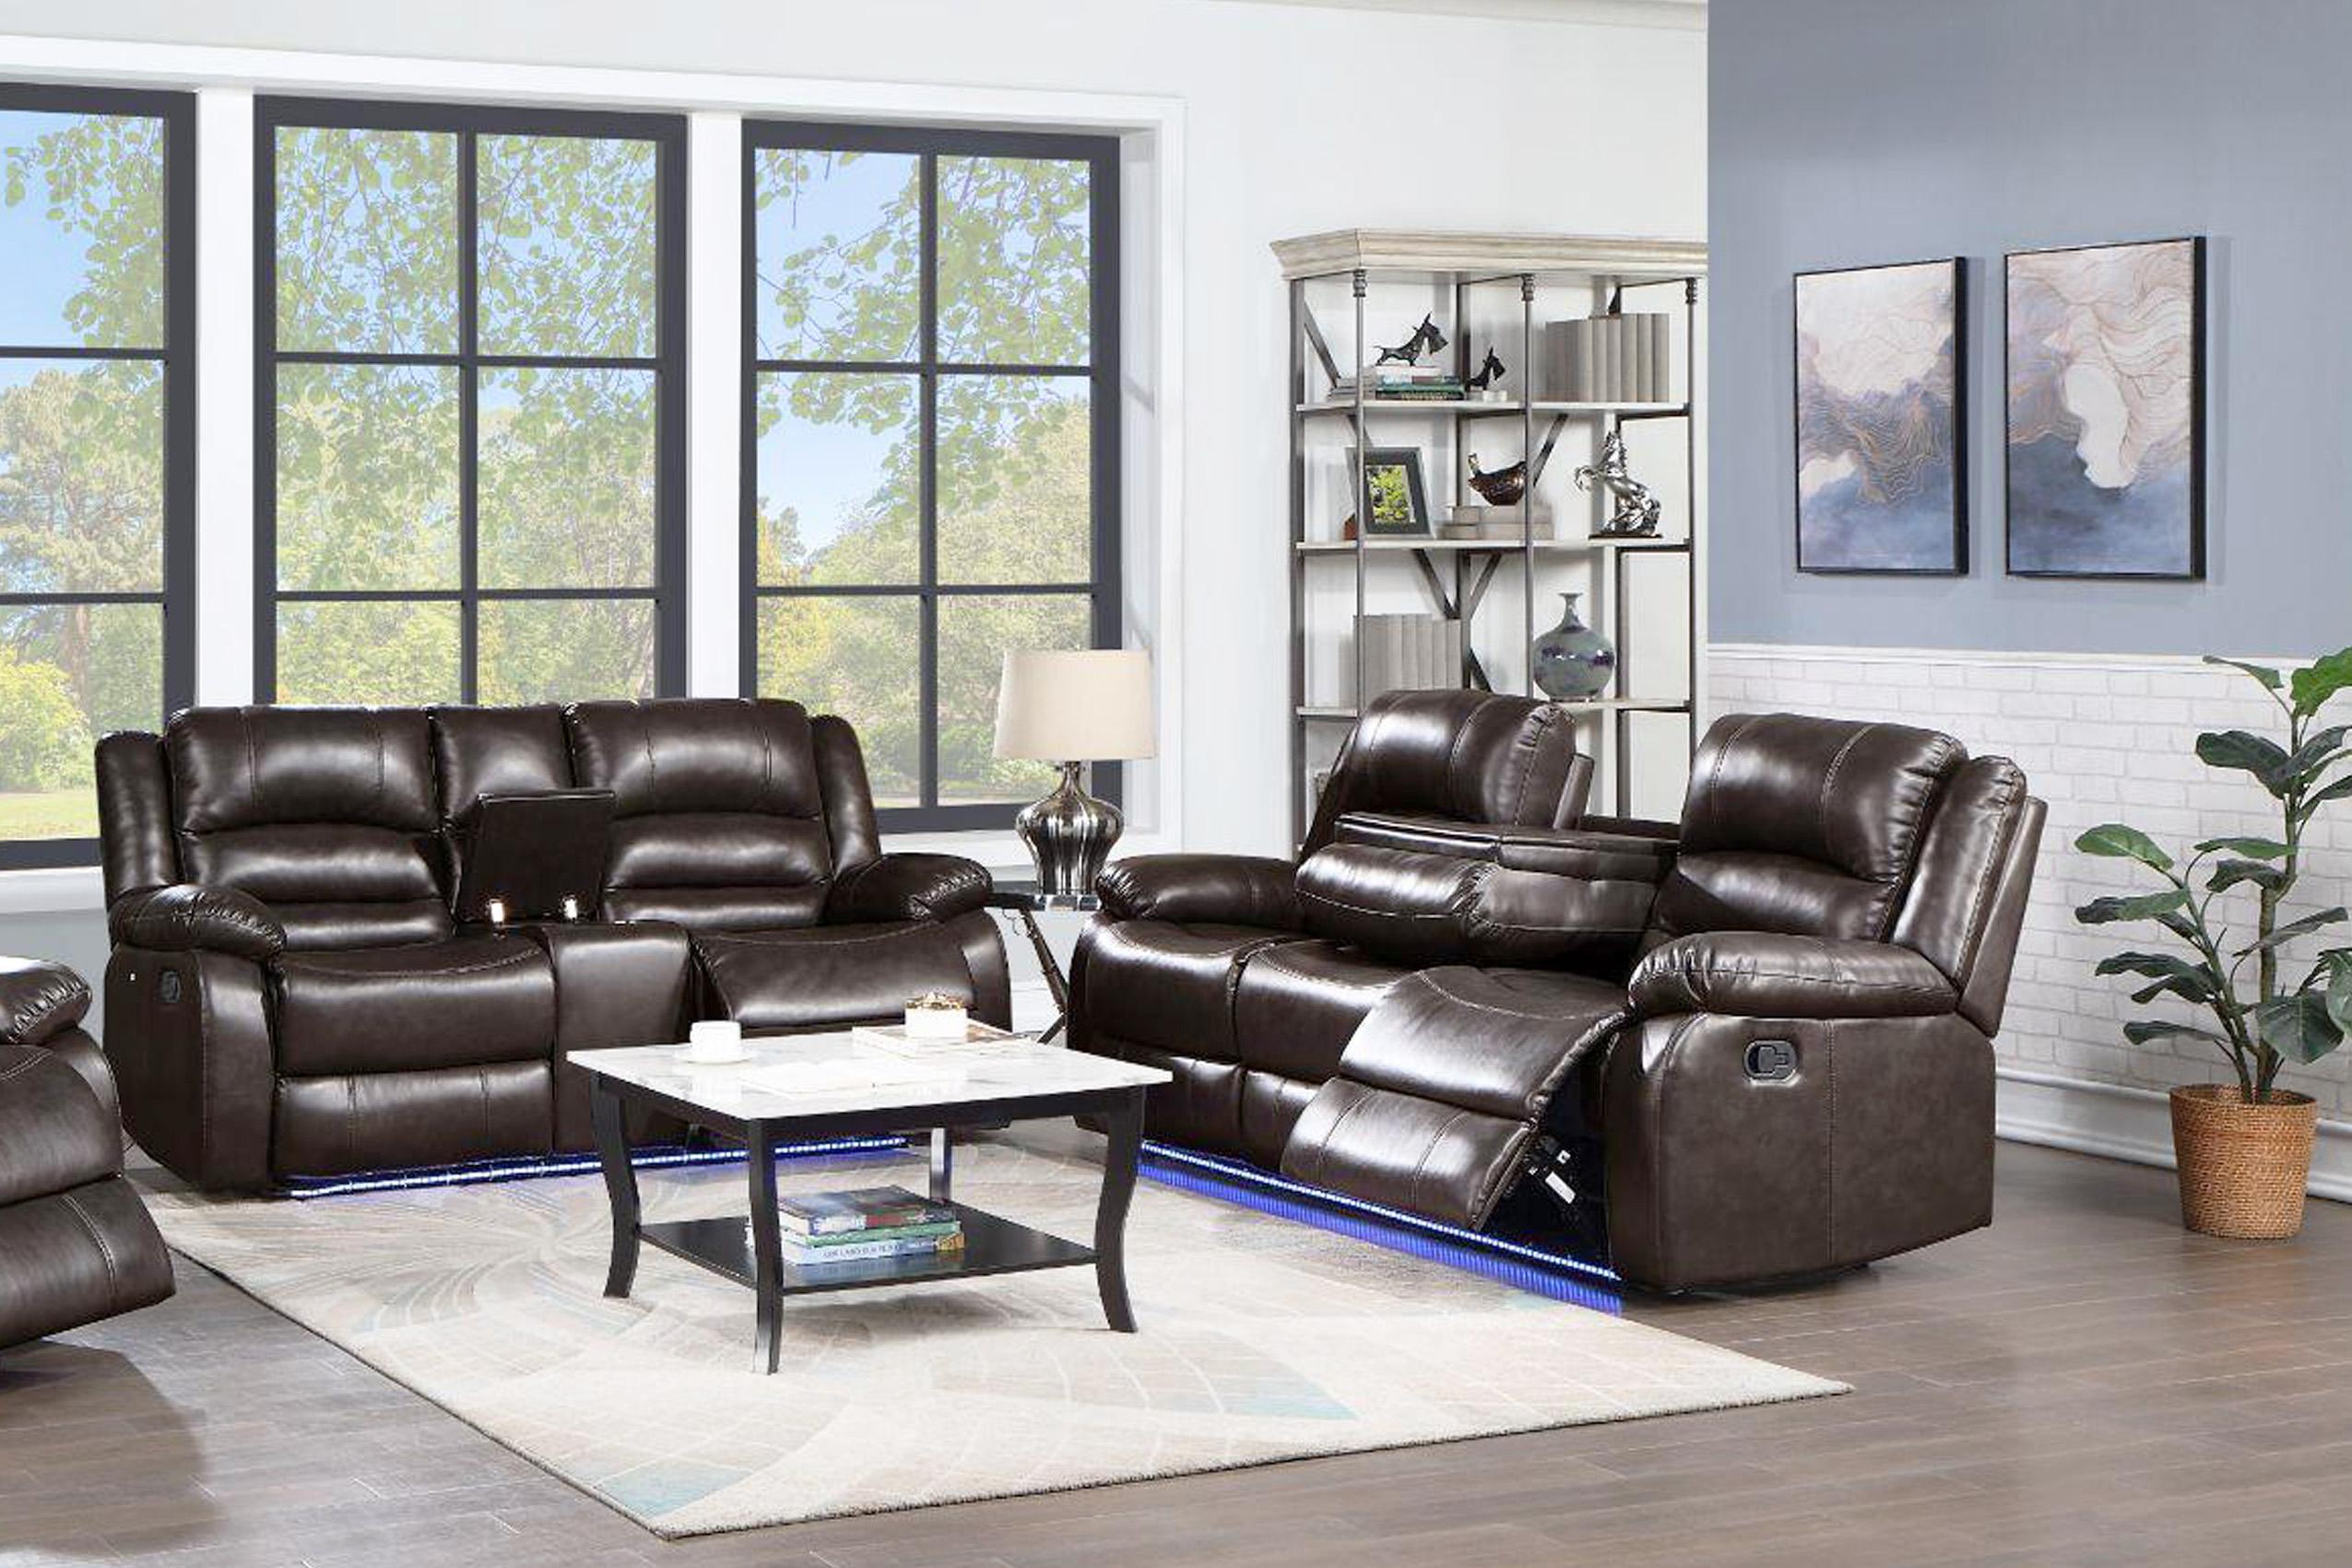 

    
Brown Faux Leather Manual Recliner Sofa Set 2Pcs MARTIN Galaxy Home Contemporary
